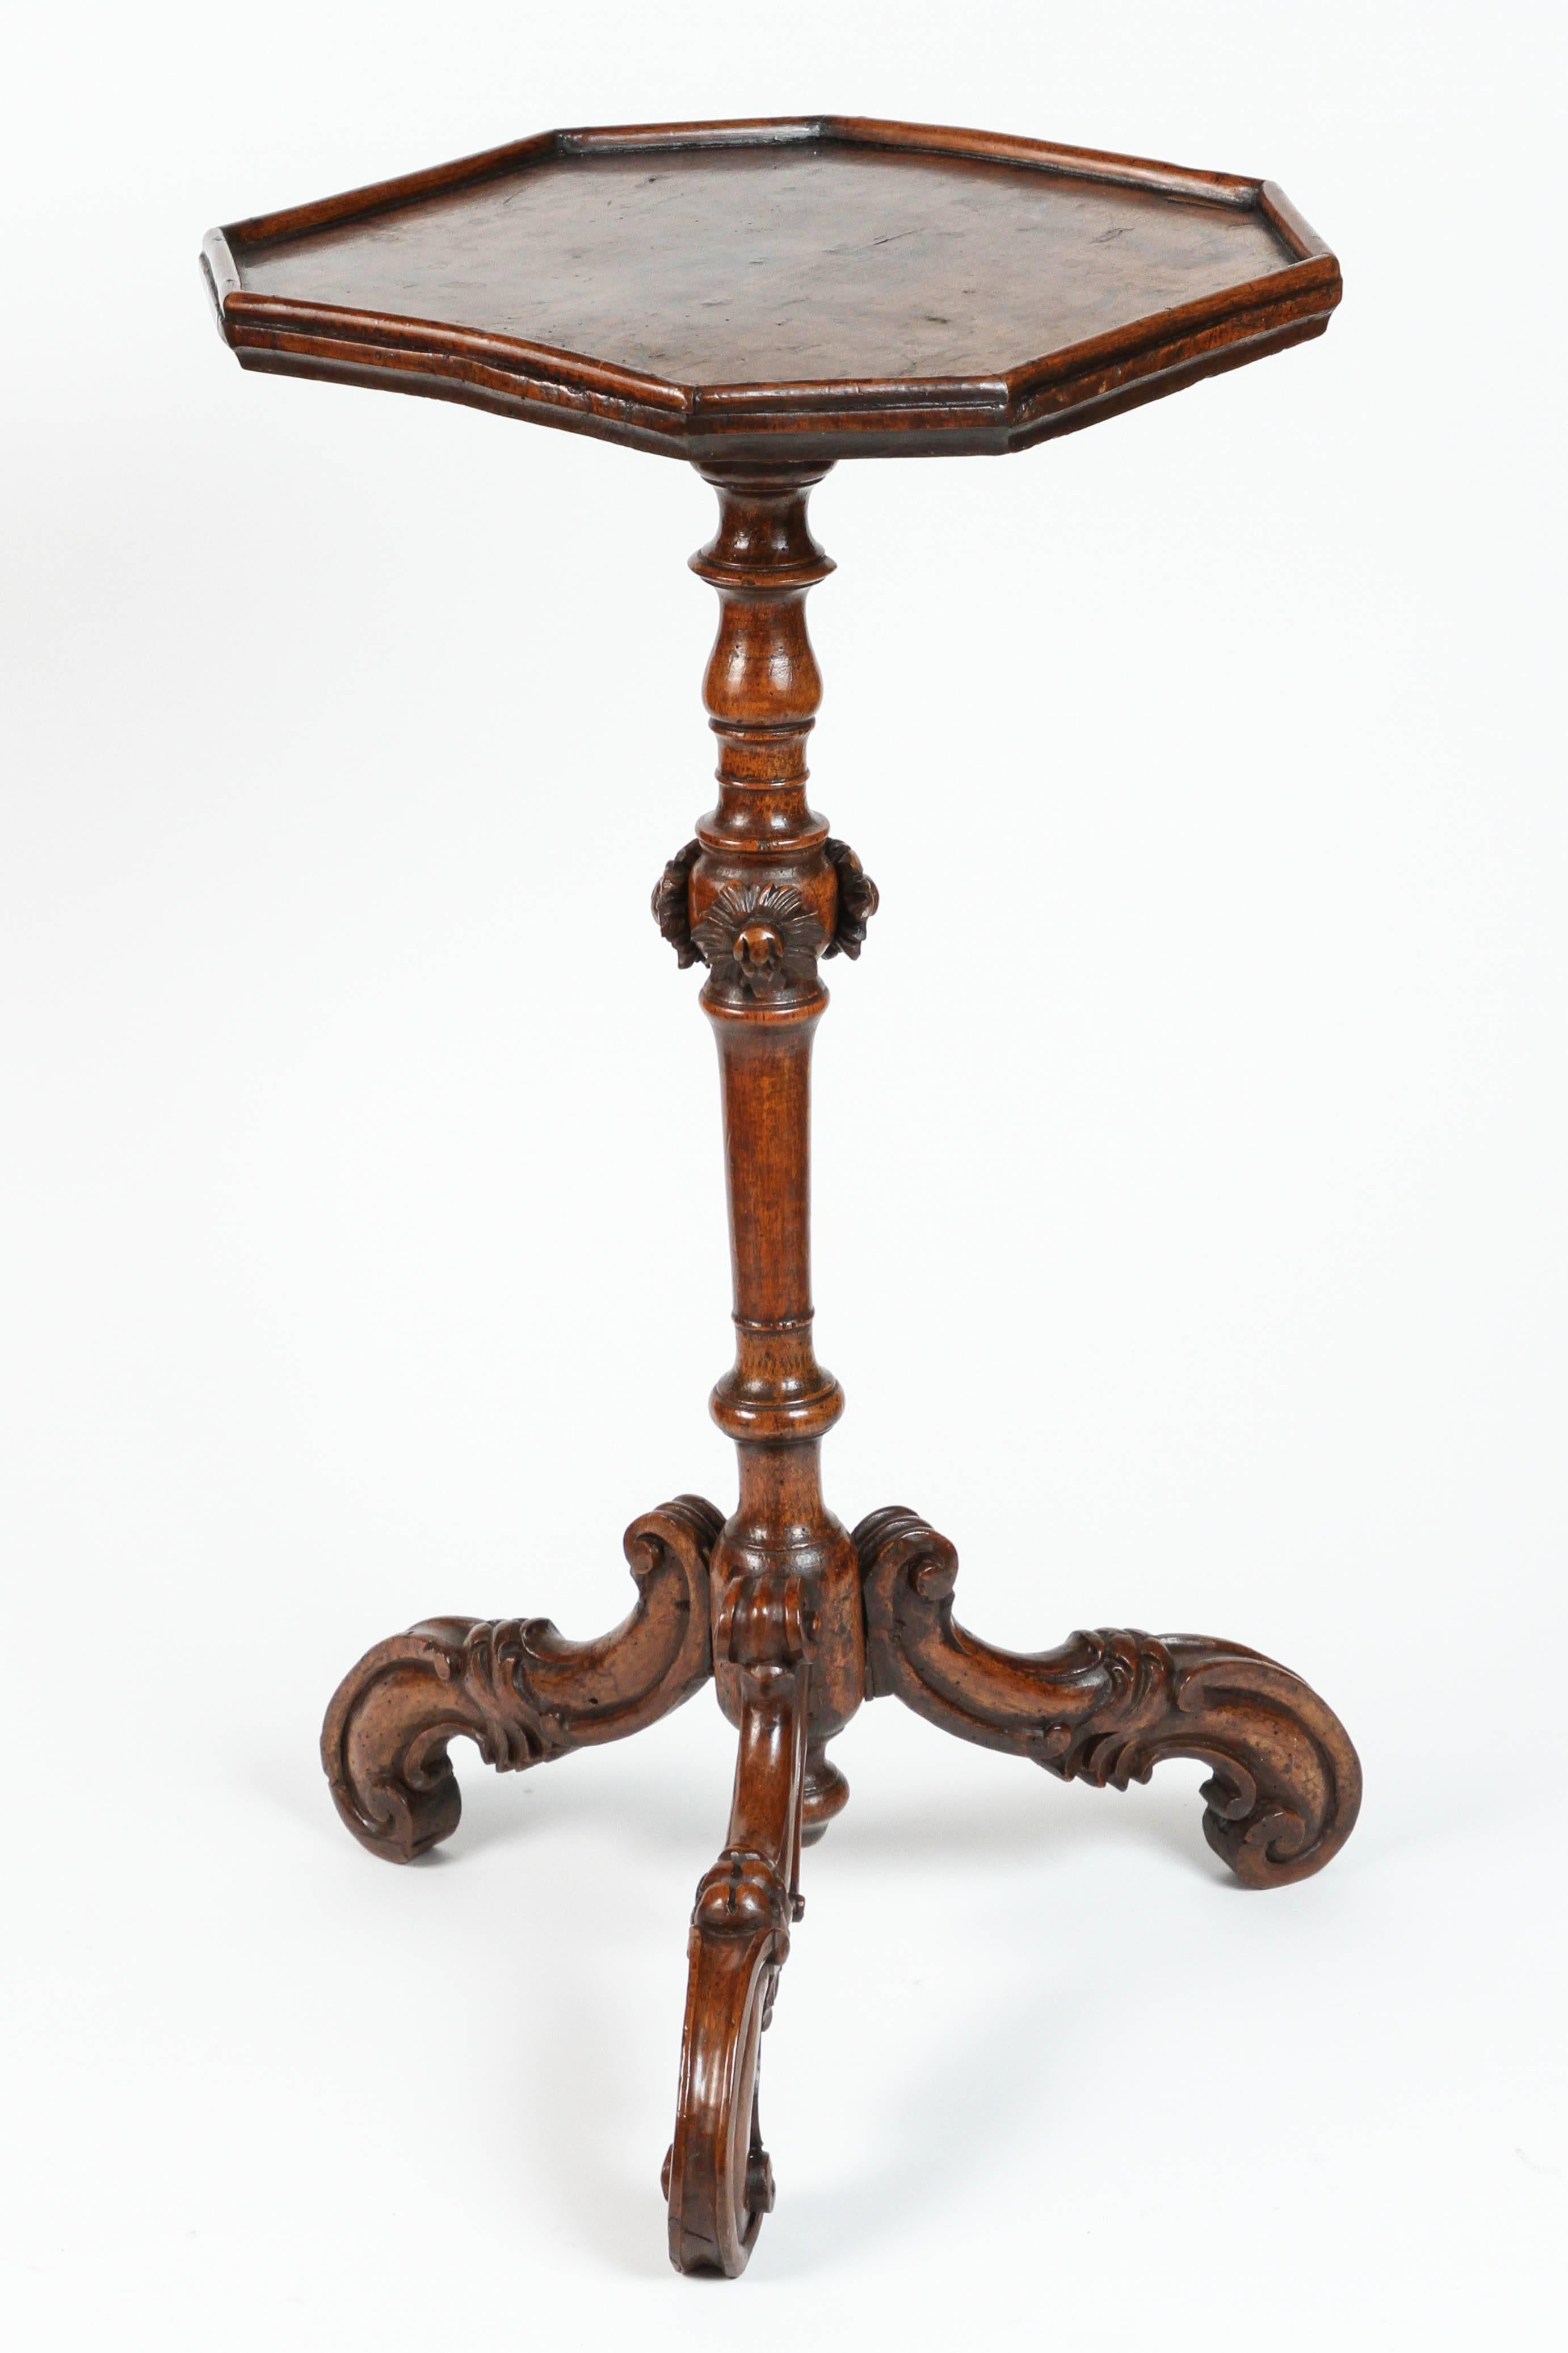 A pair of delicately carved Venetian walnut candlestands from the 18th century the stand sits on a beautifully detailed Rococo tripod-legged base.